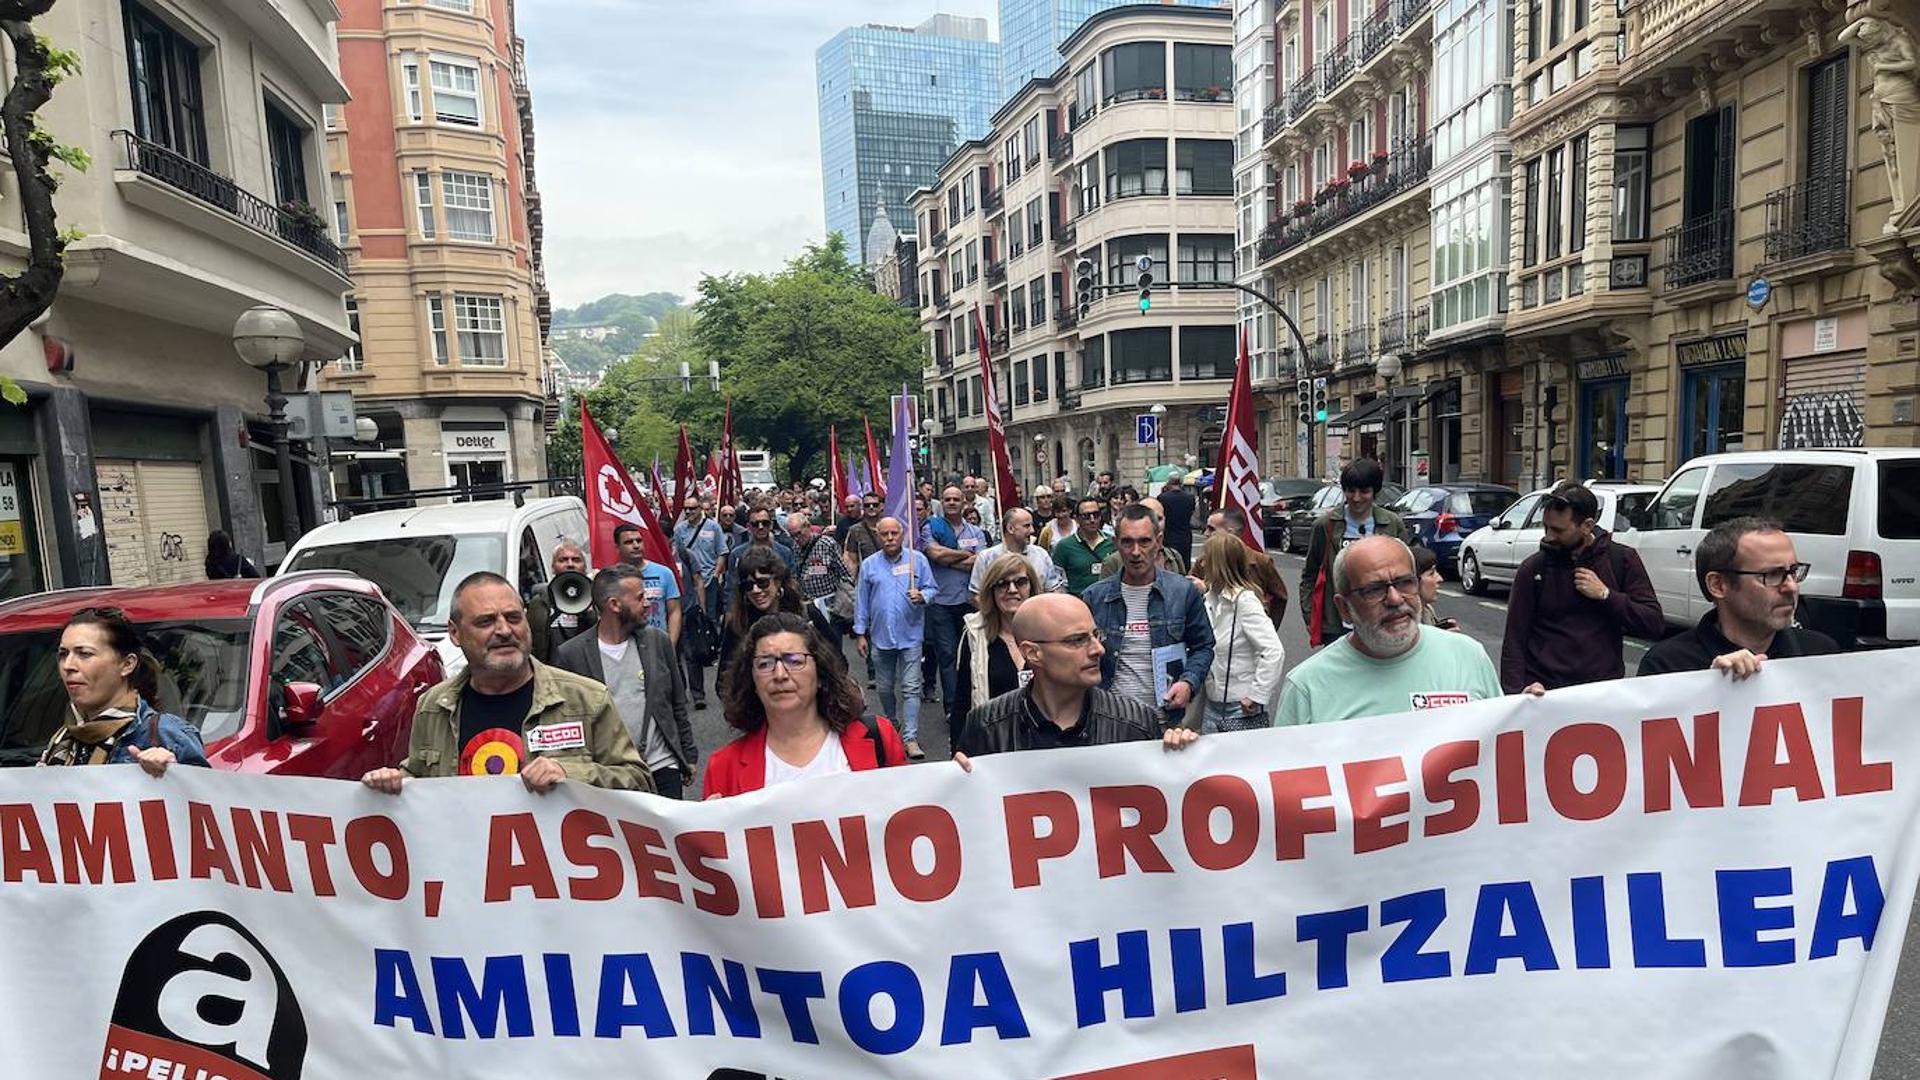 CCOO claims with a march in Bilbao the International Day of Occupational Health